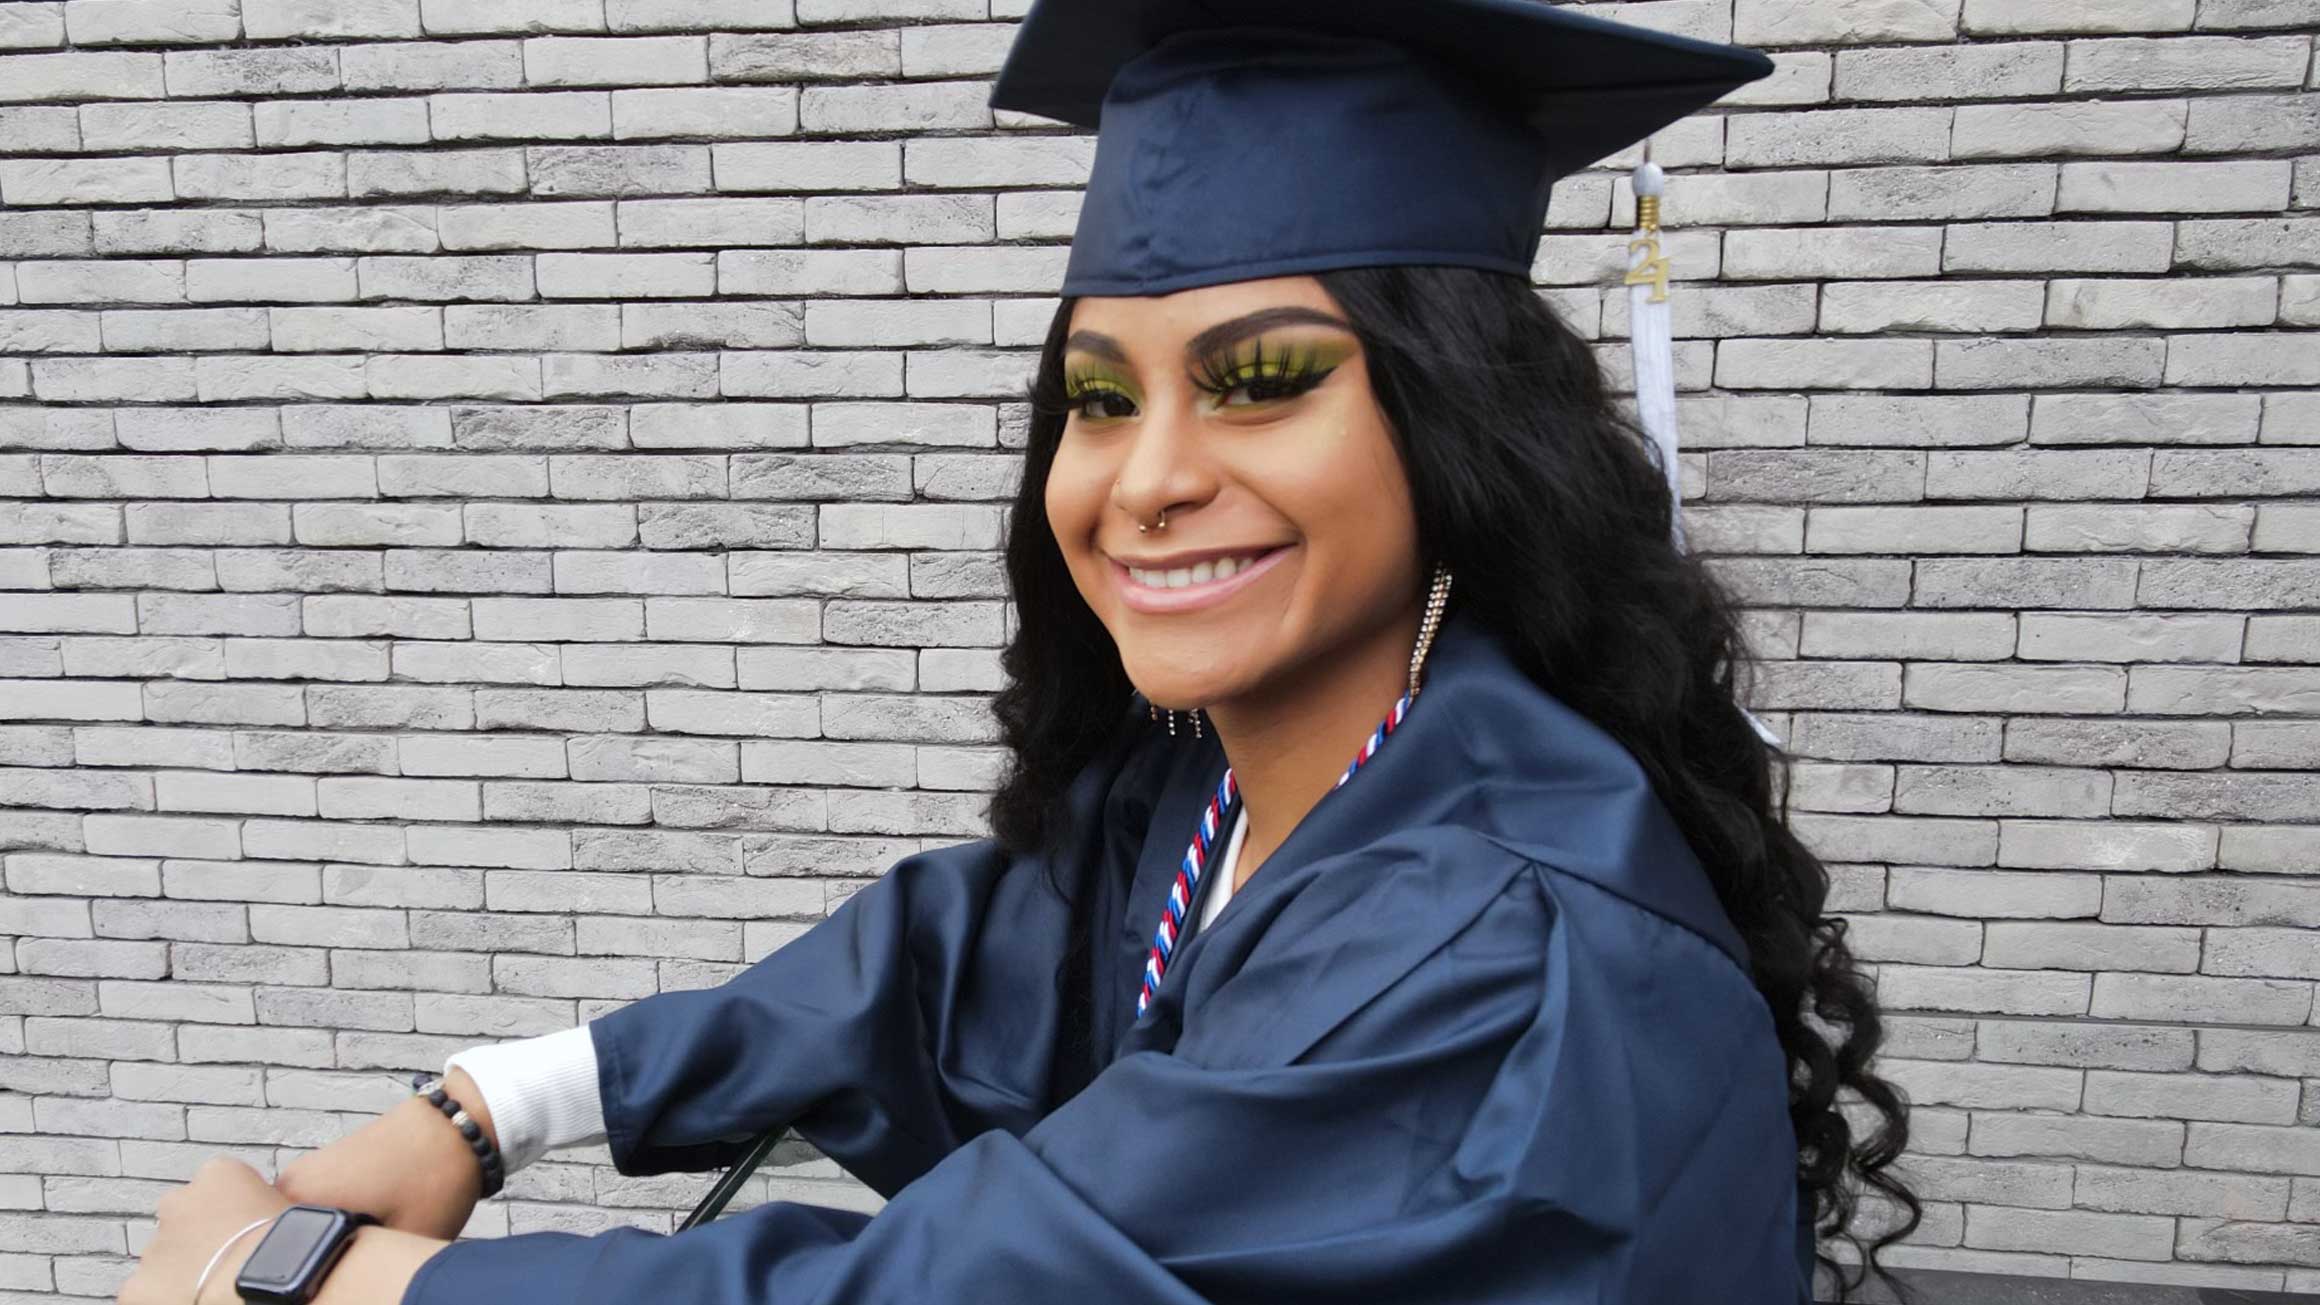 Yanelis Funez smiling in her cap and gown.